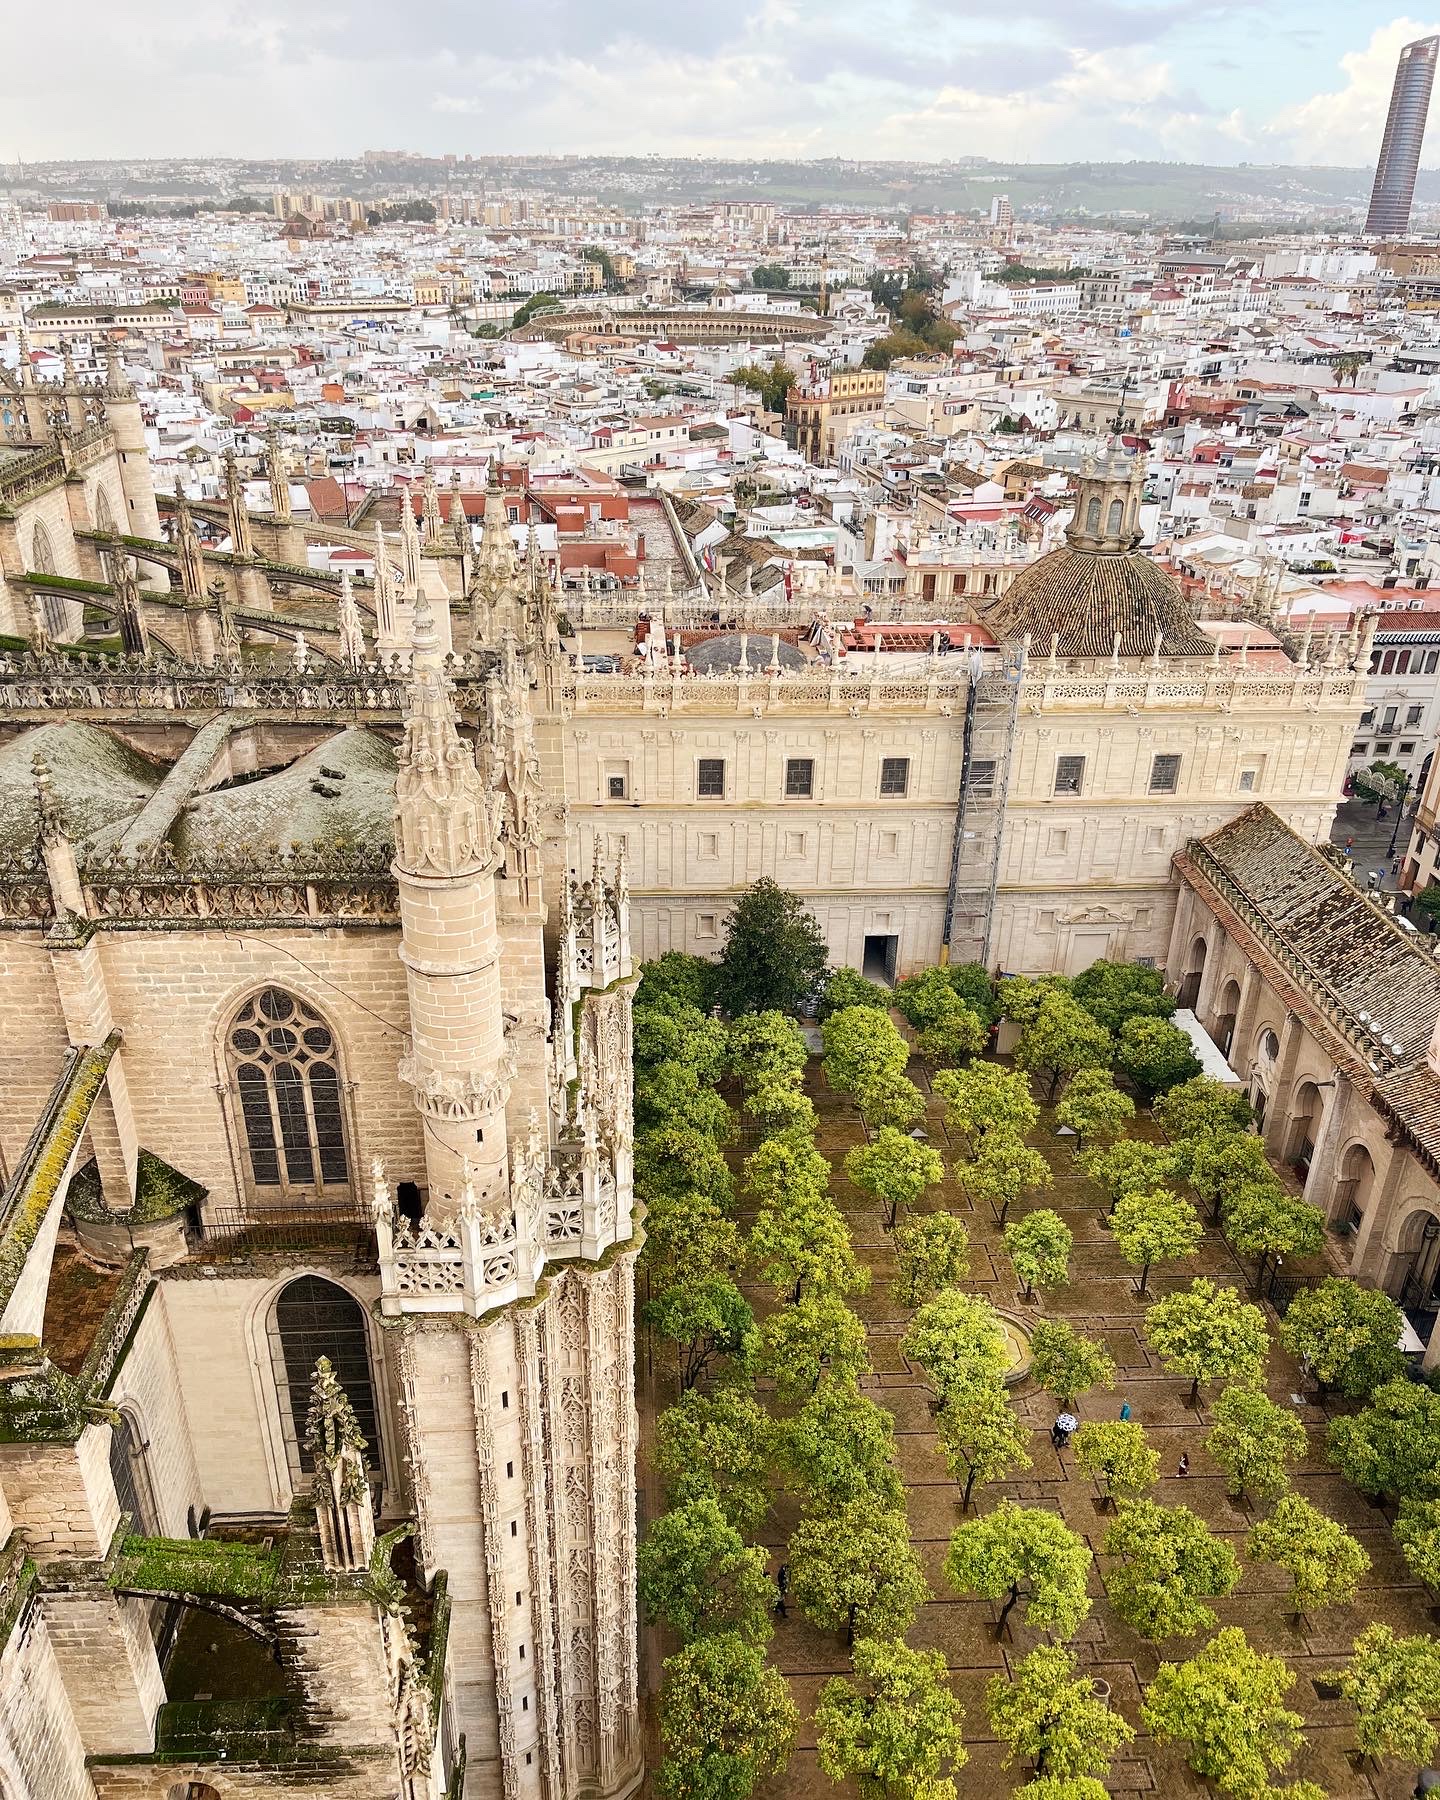 The view from the cathedral in Seville 